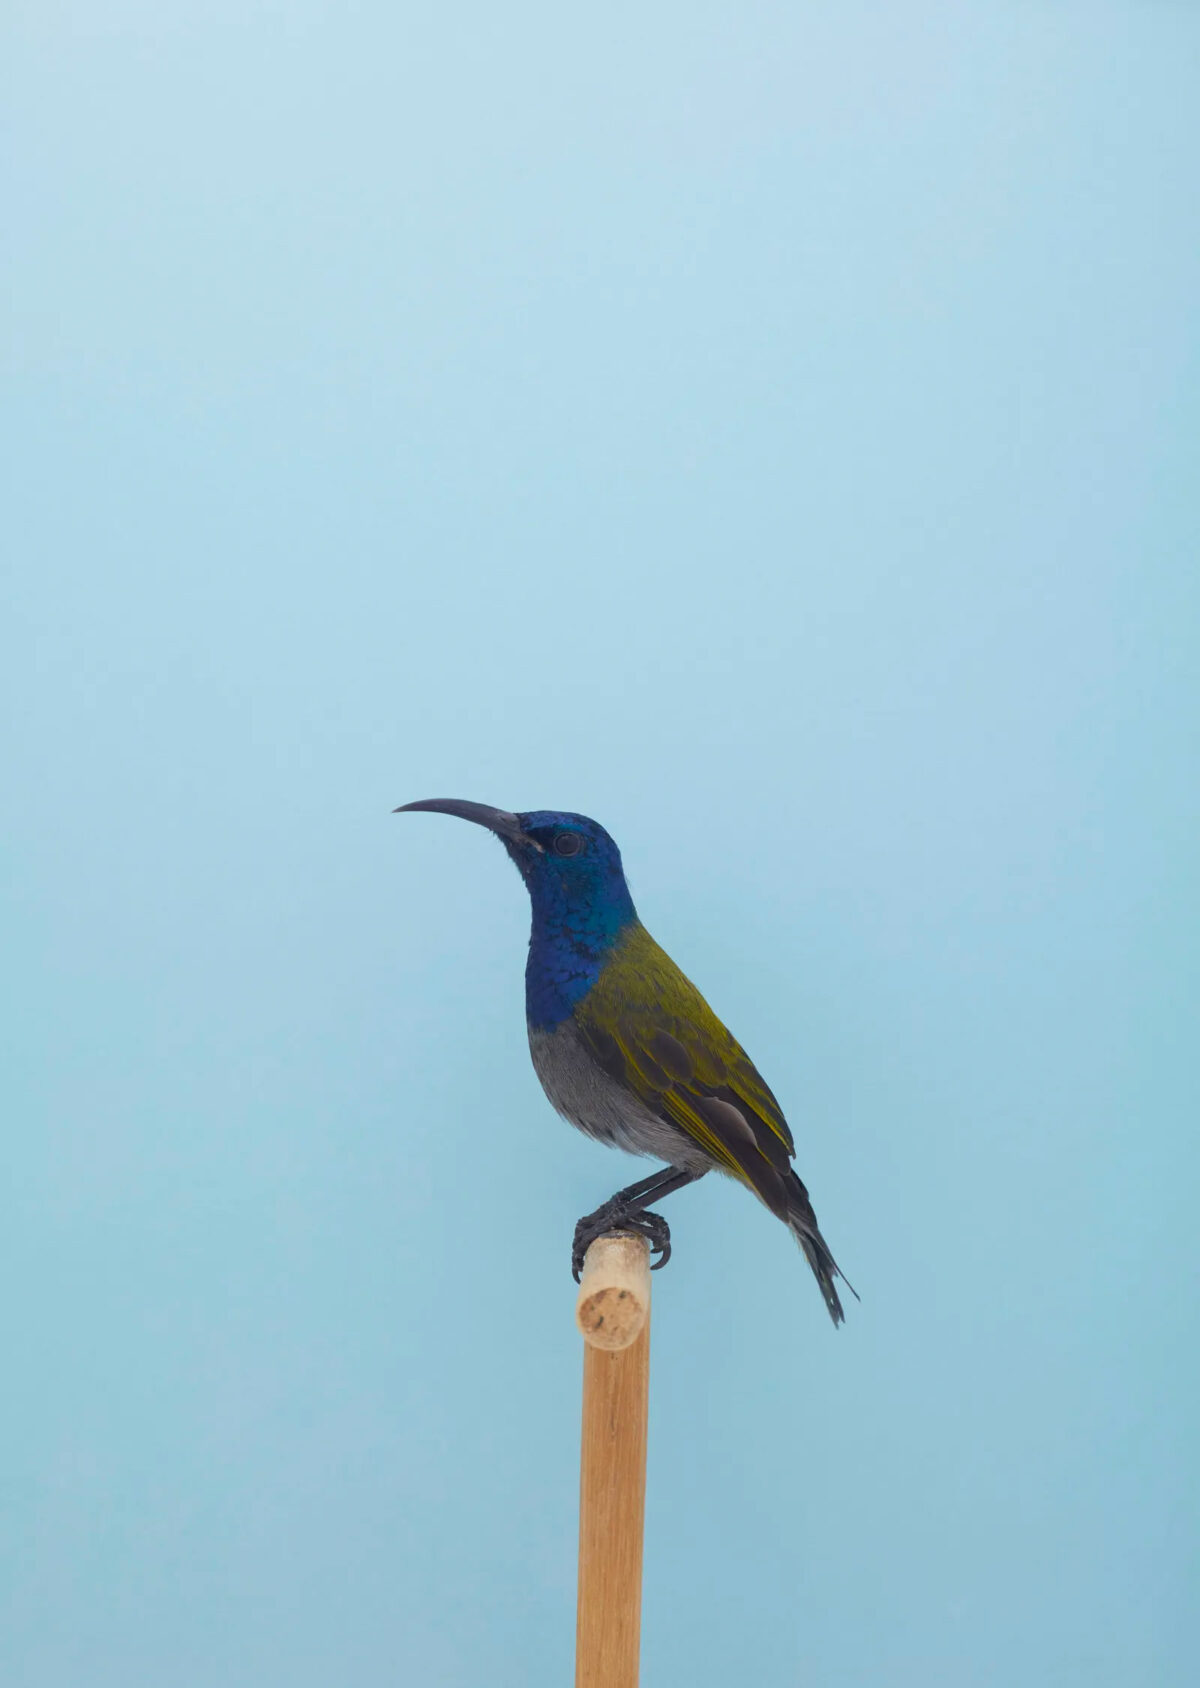 An Incomplete Dictionary Of Show Birds A Minimalist Bird Photography Series By Luke Stephenson (9)